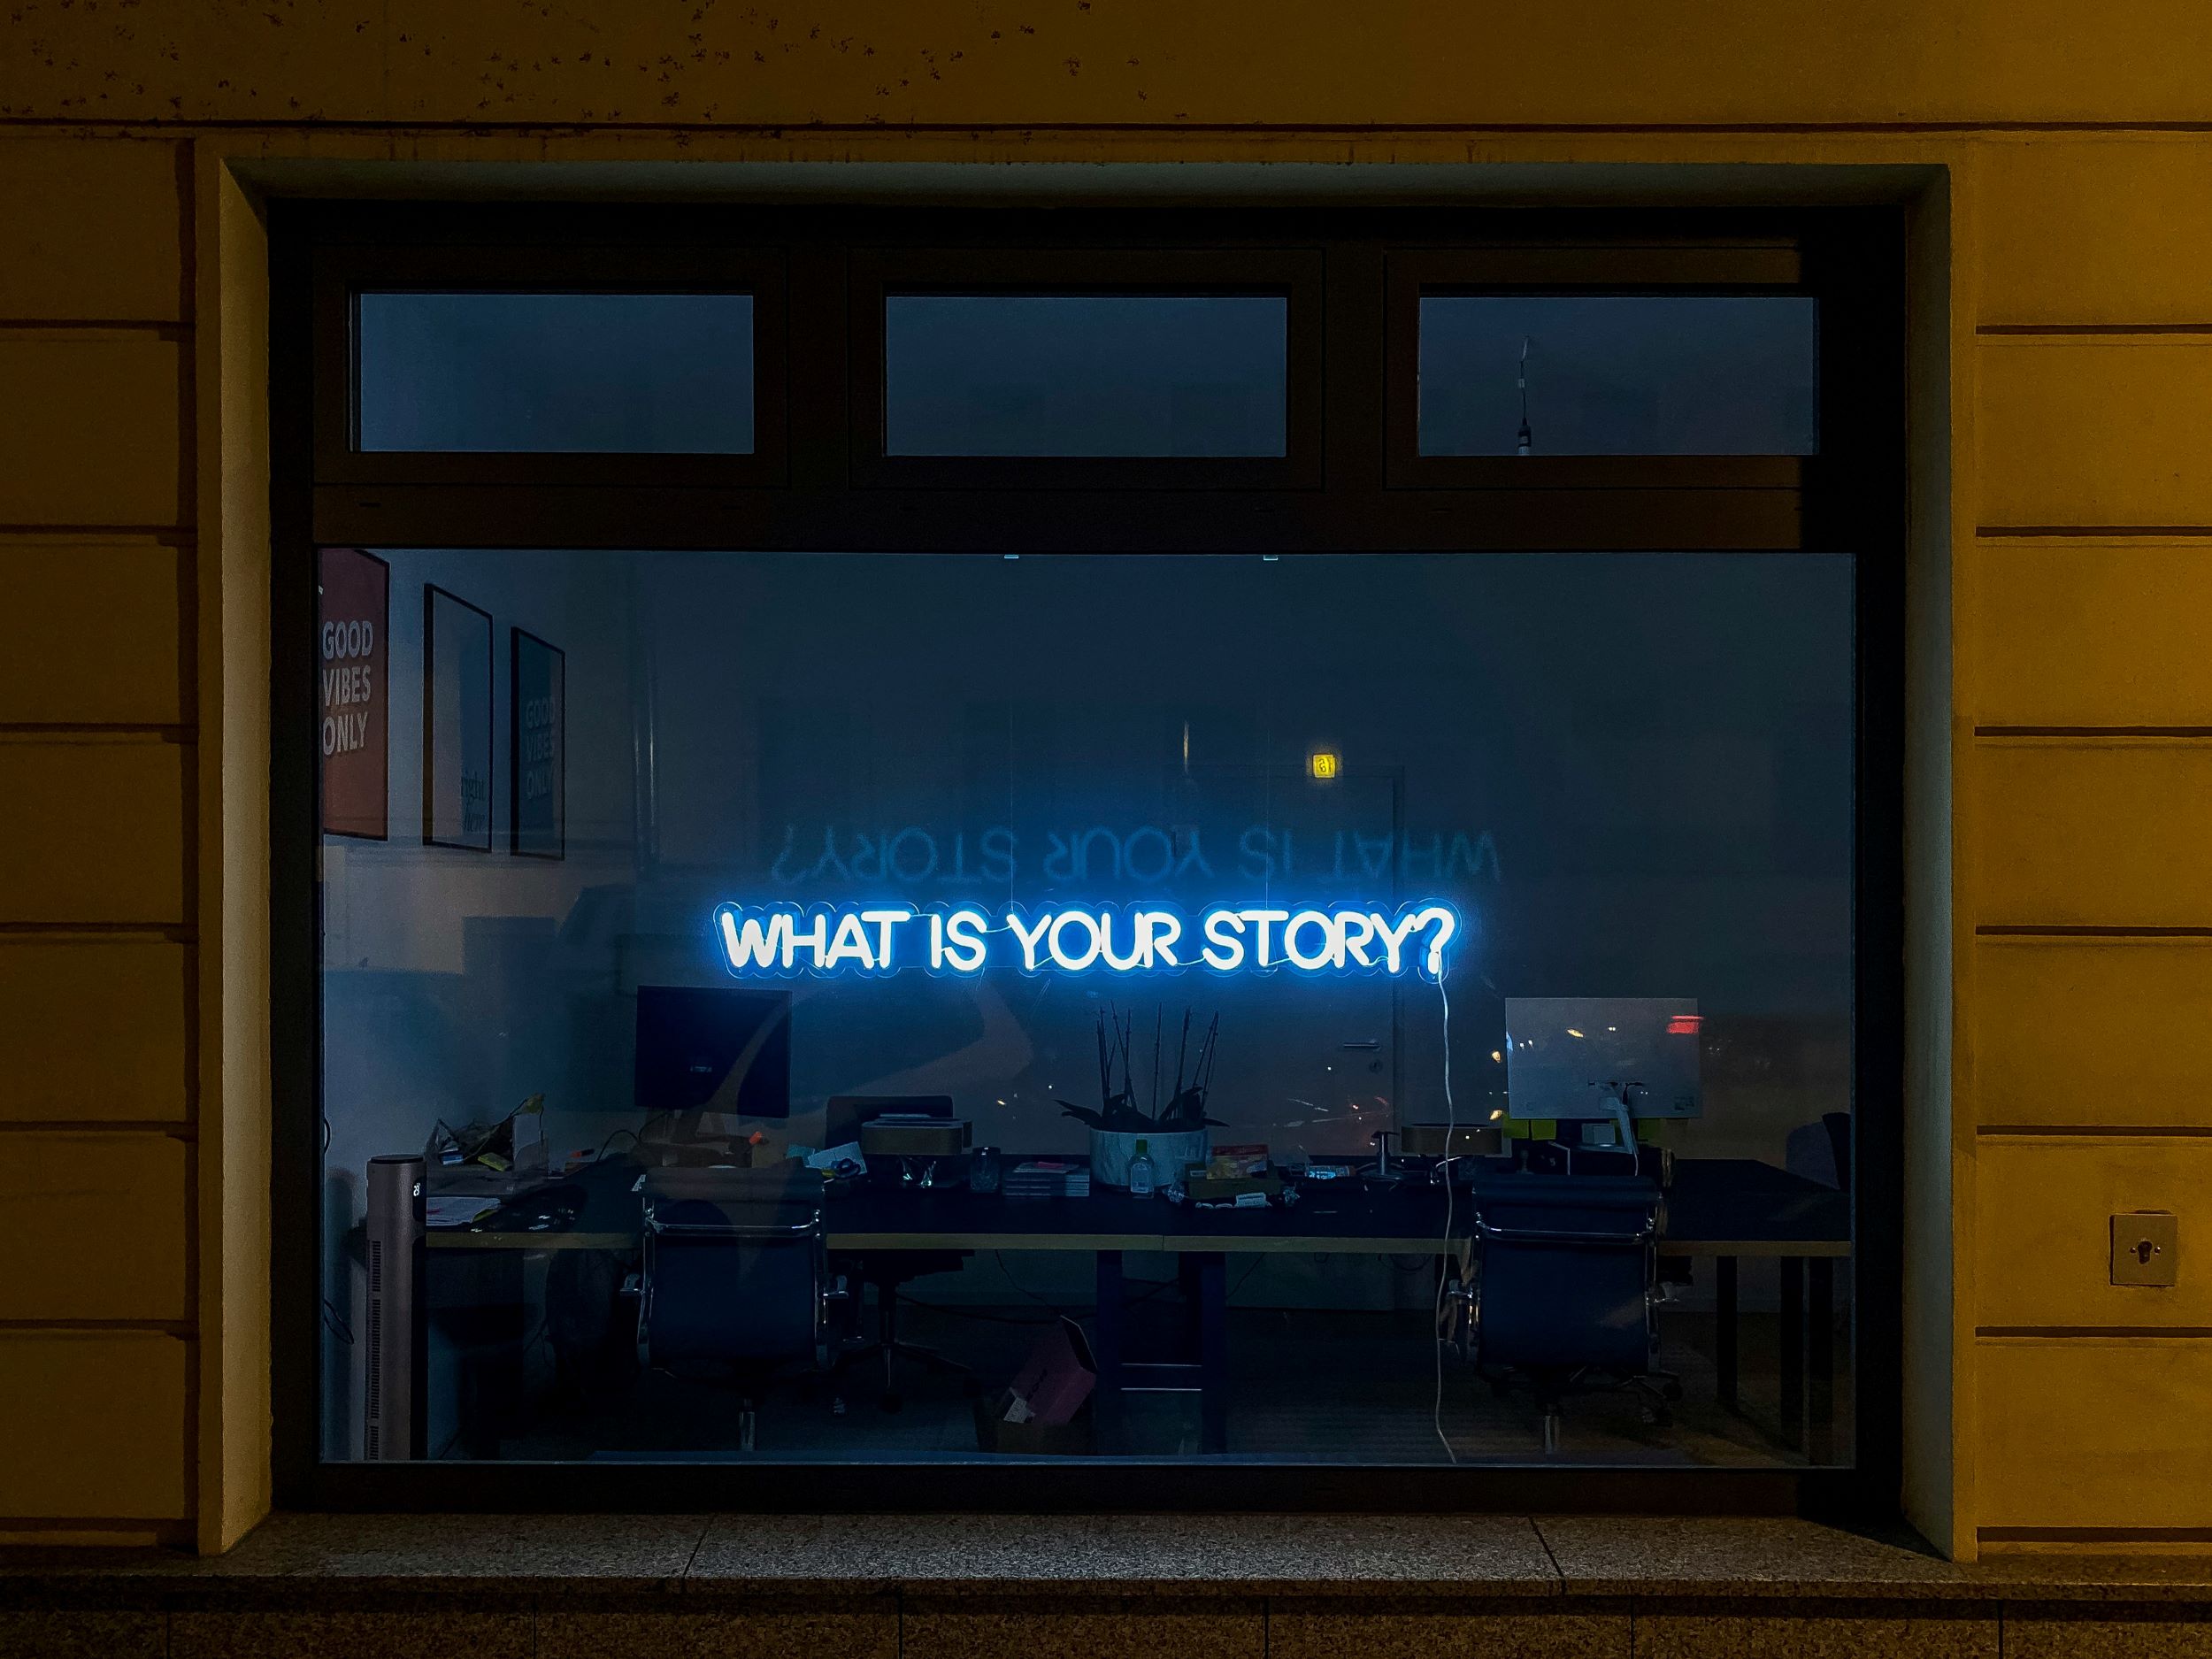 neon sign that asks "What is your story?"